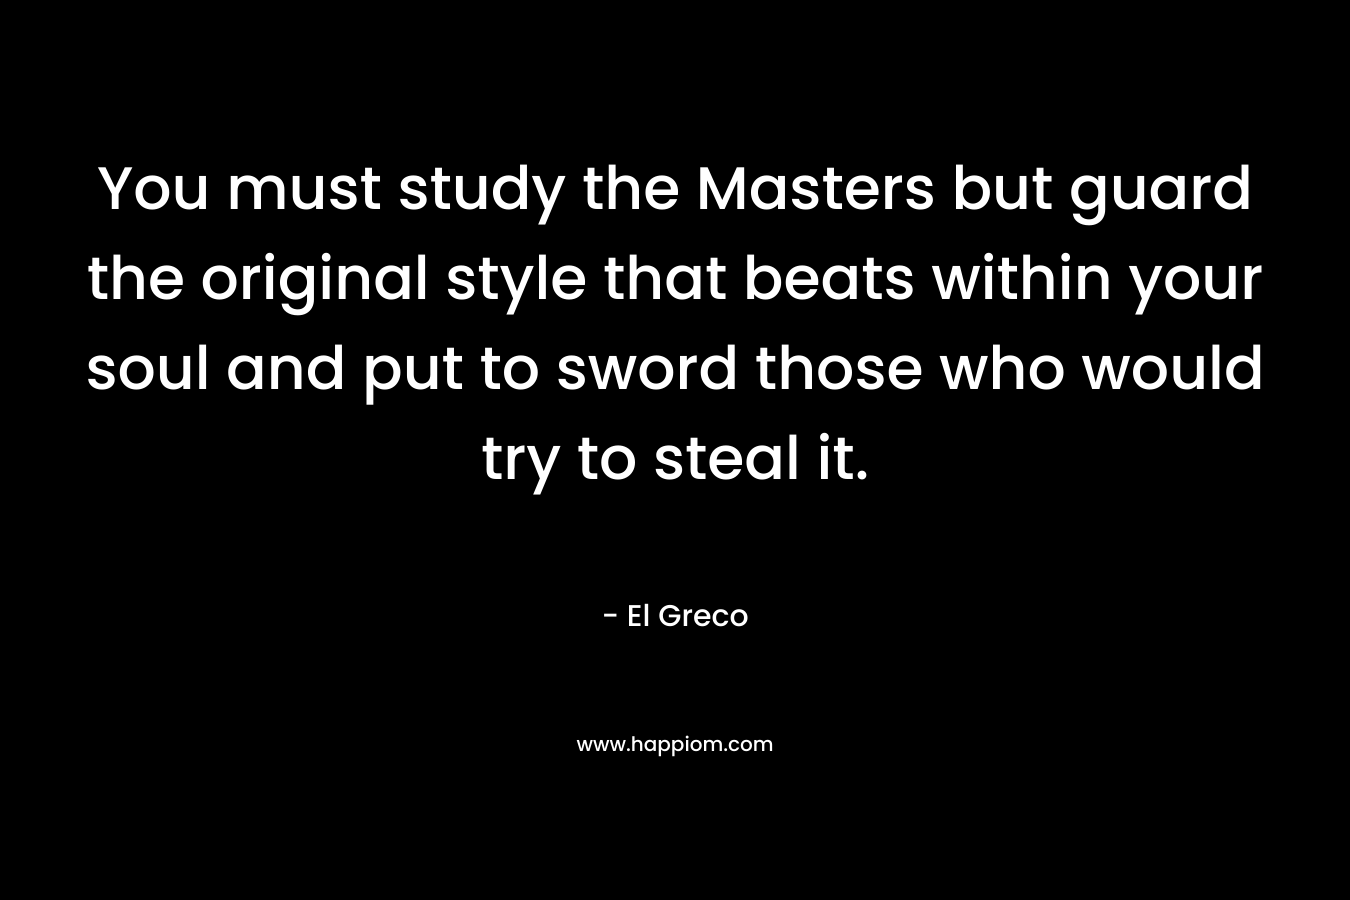 You must study the Masters but guard the original style that beats within your soul and put to sword those who would try to steal it.